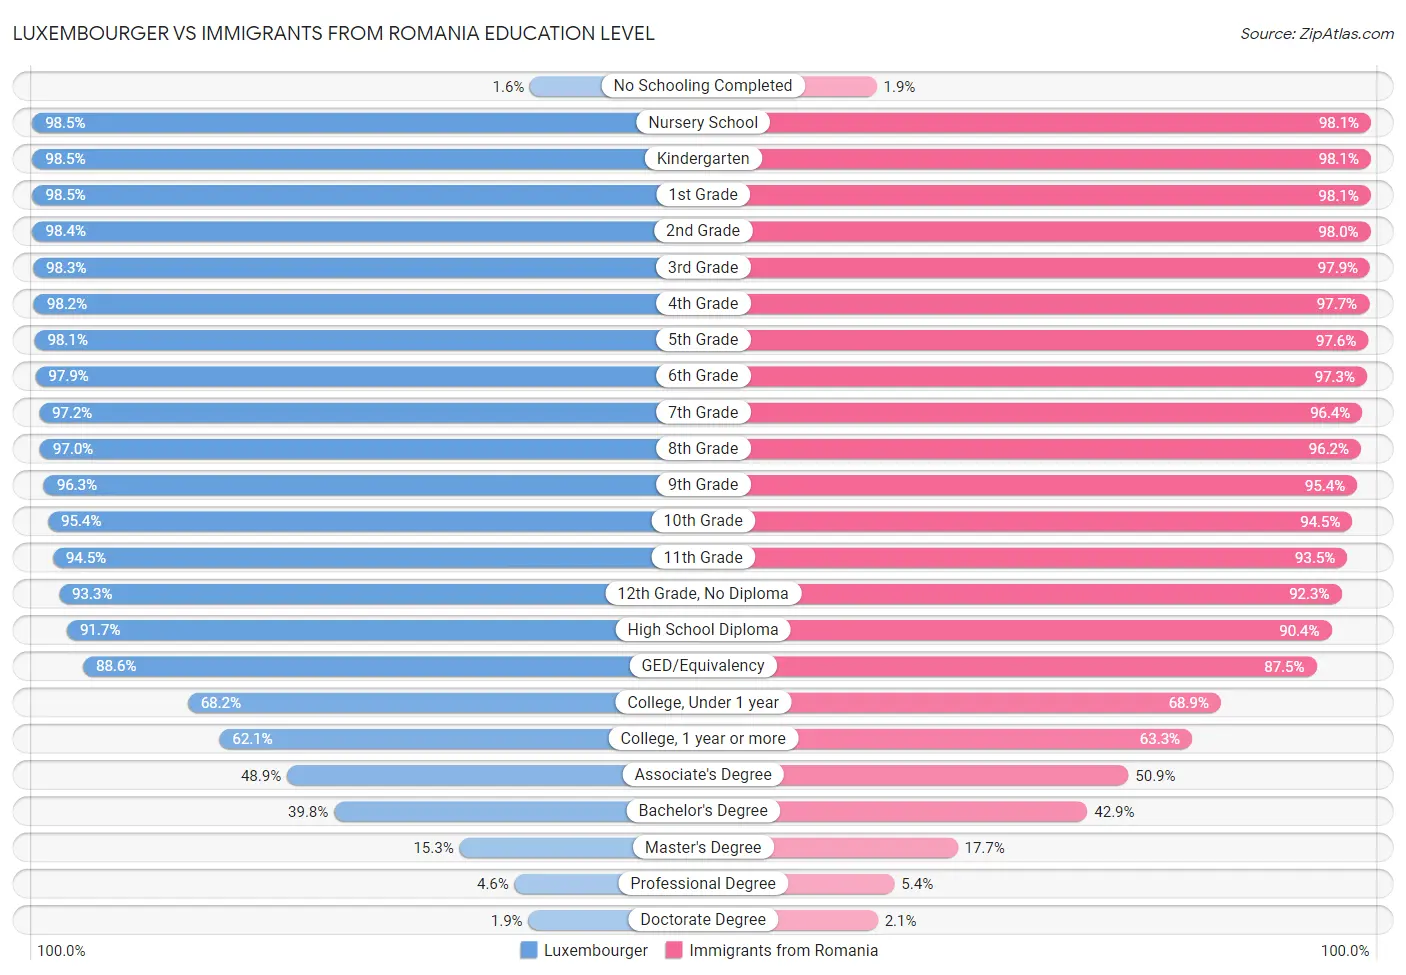 Luxembourger vs Immigrants from Romania Education Level